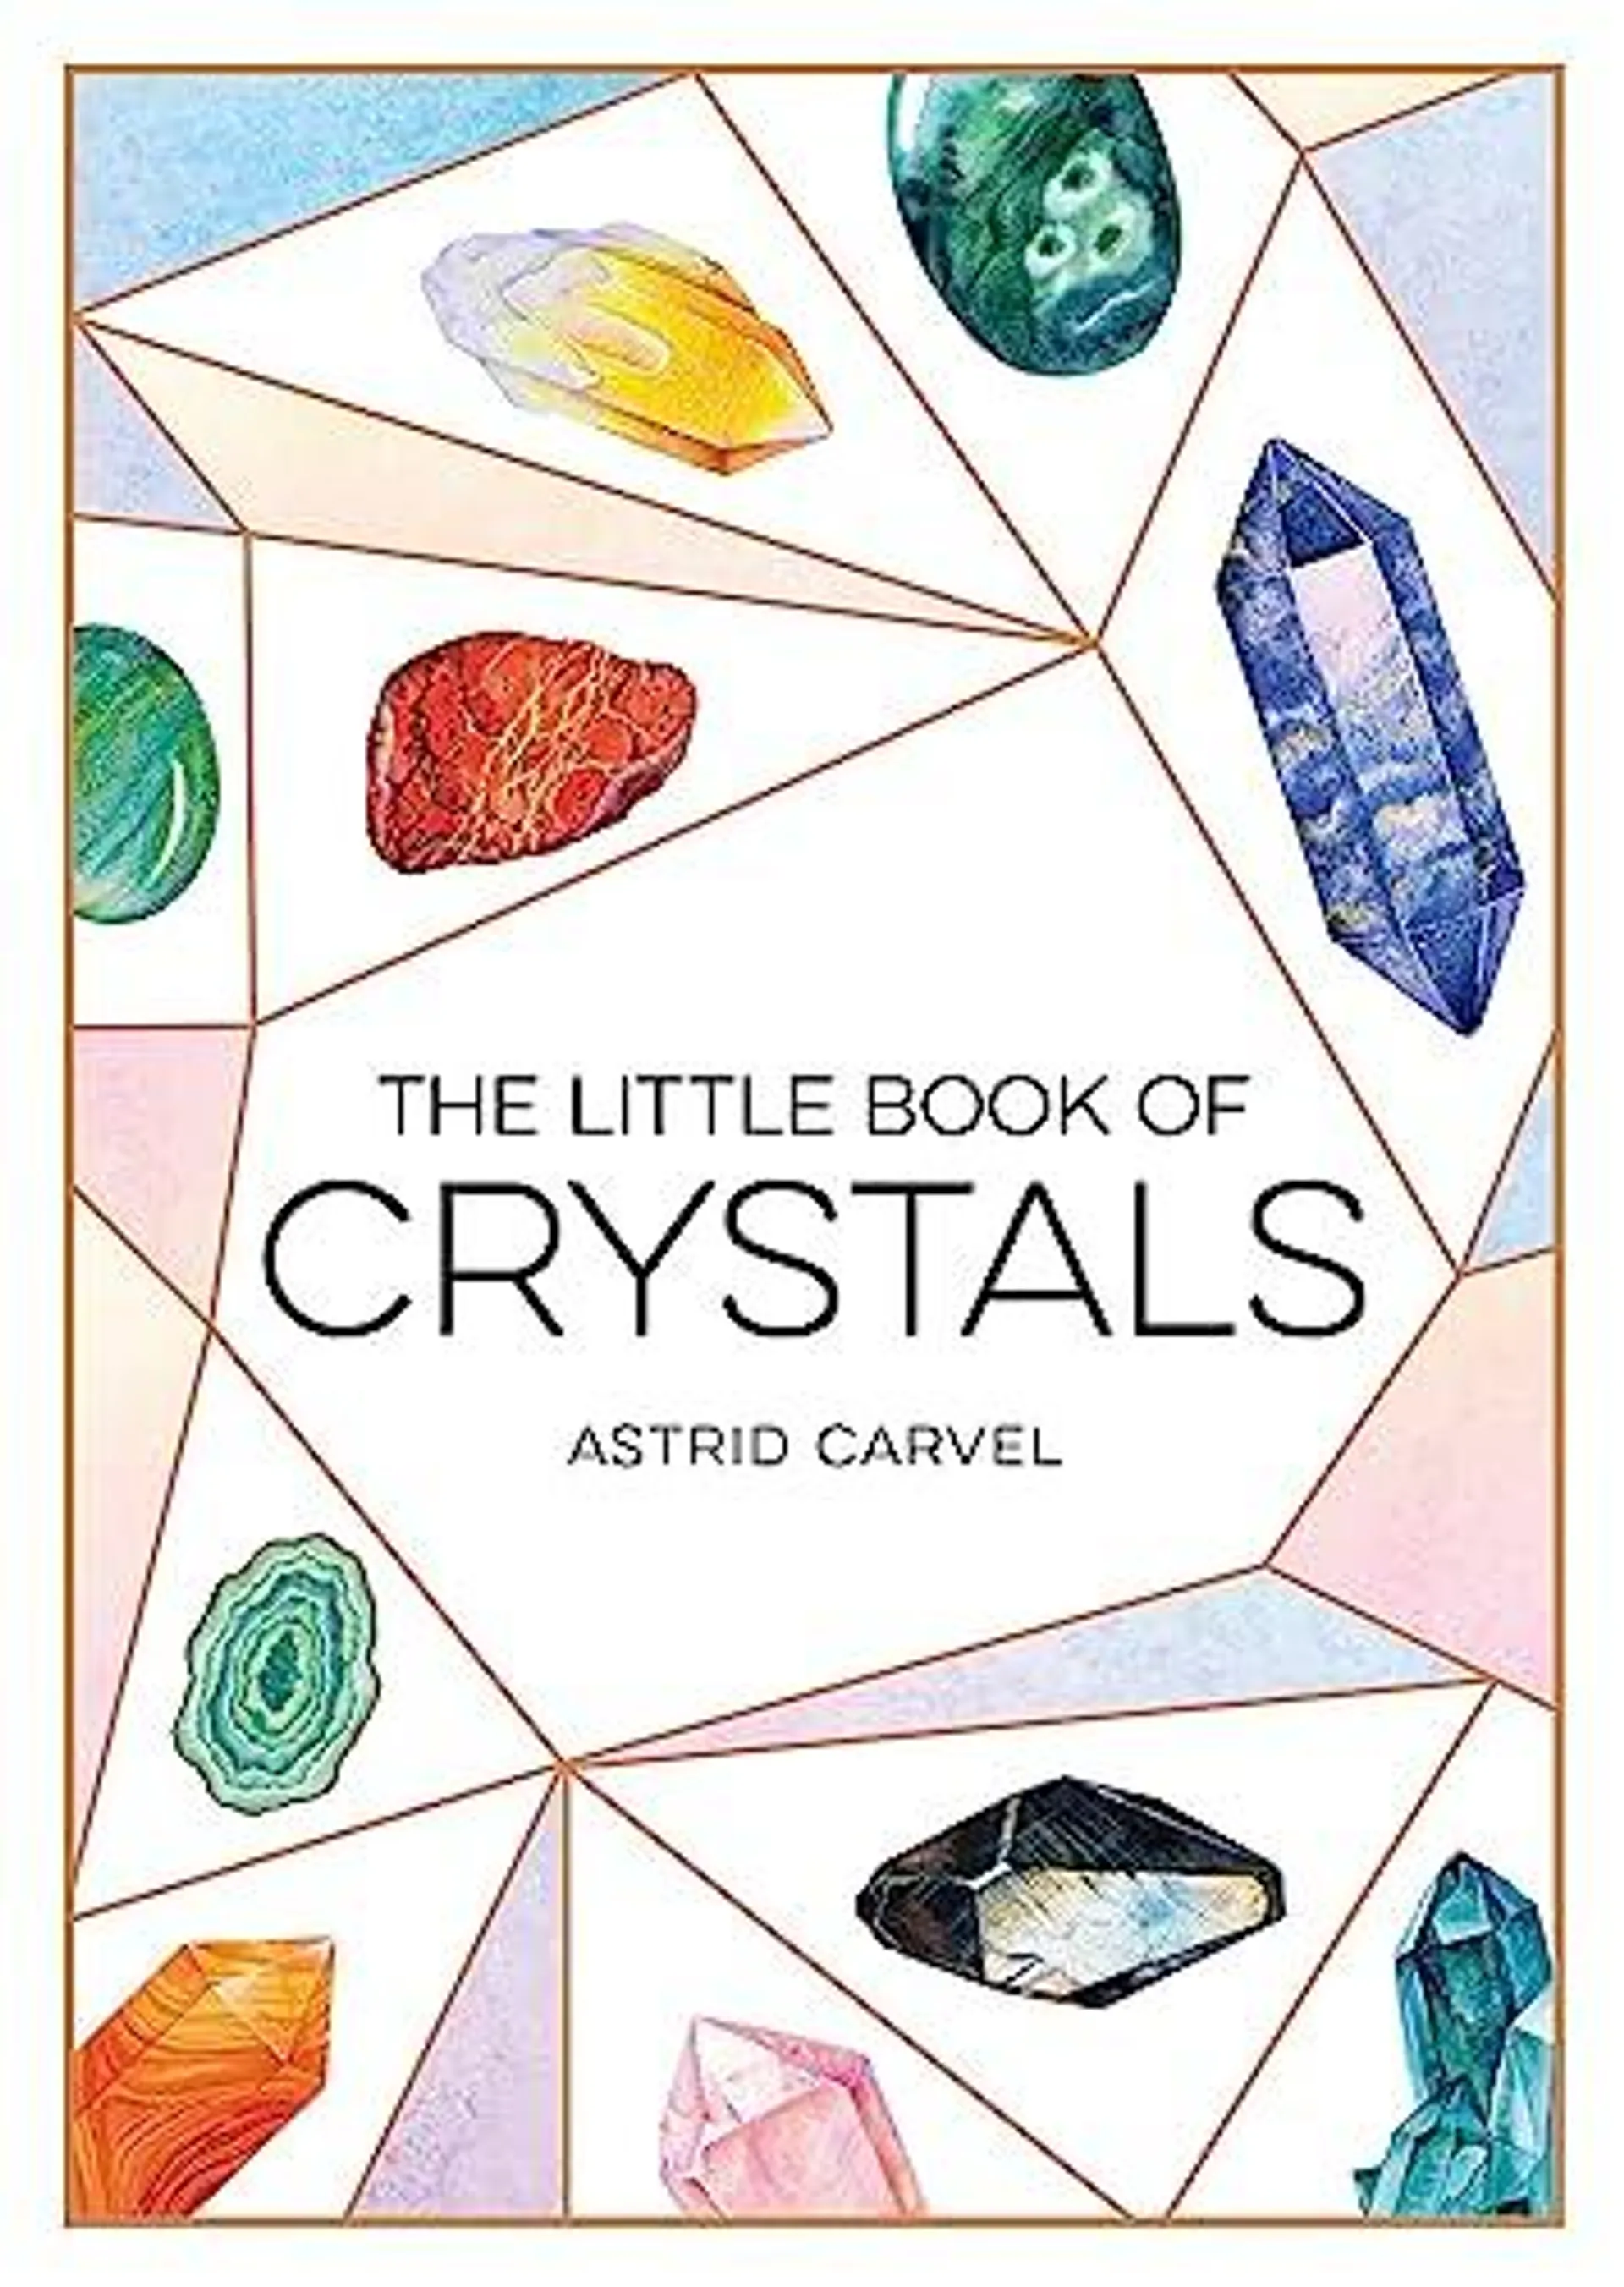 The Little Book of Crystals by Astrid Carvel